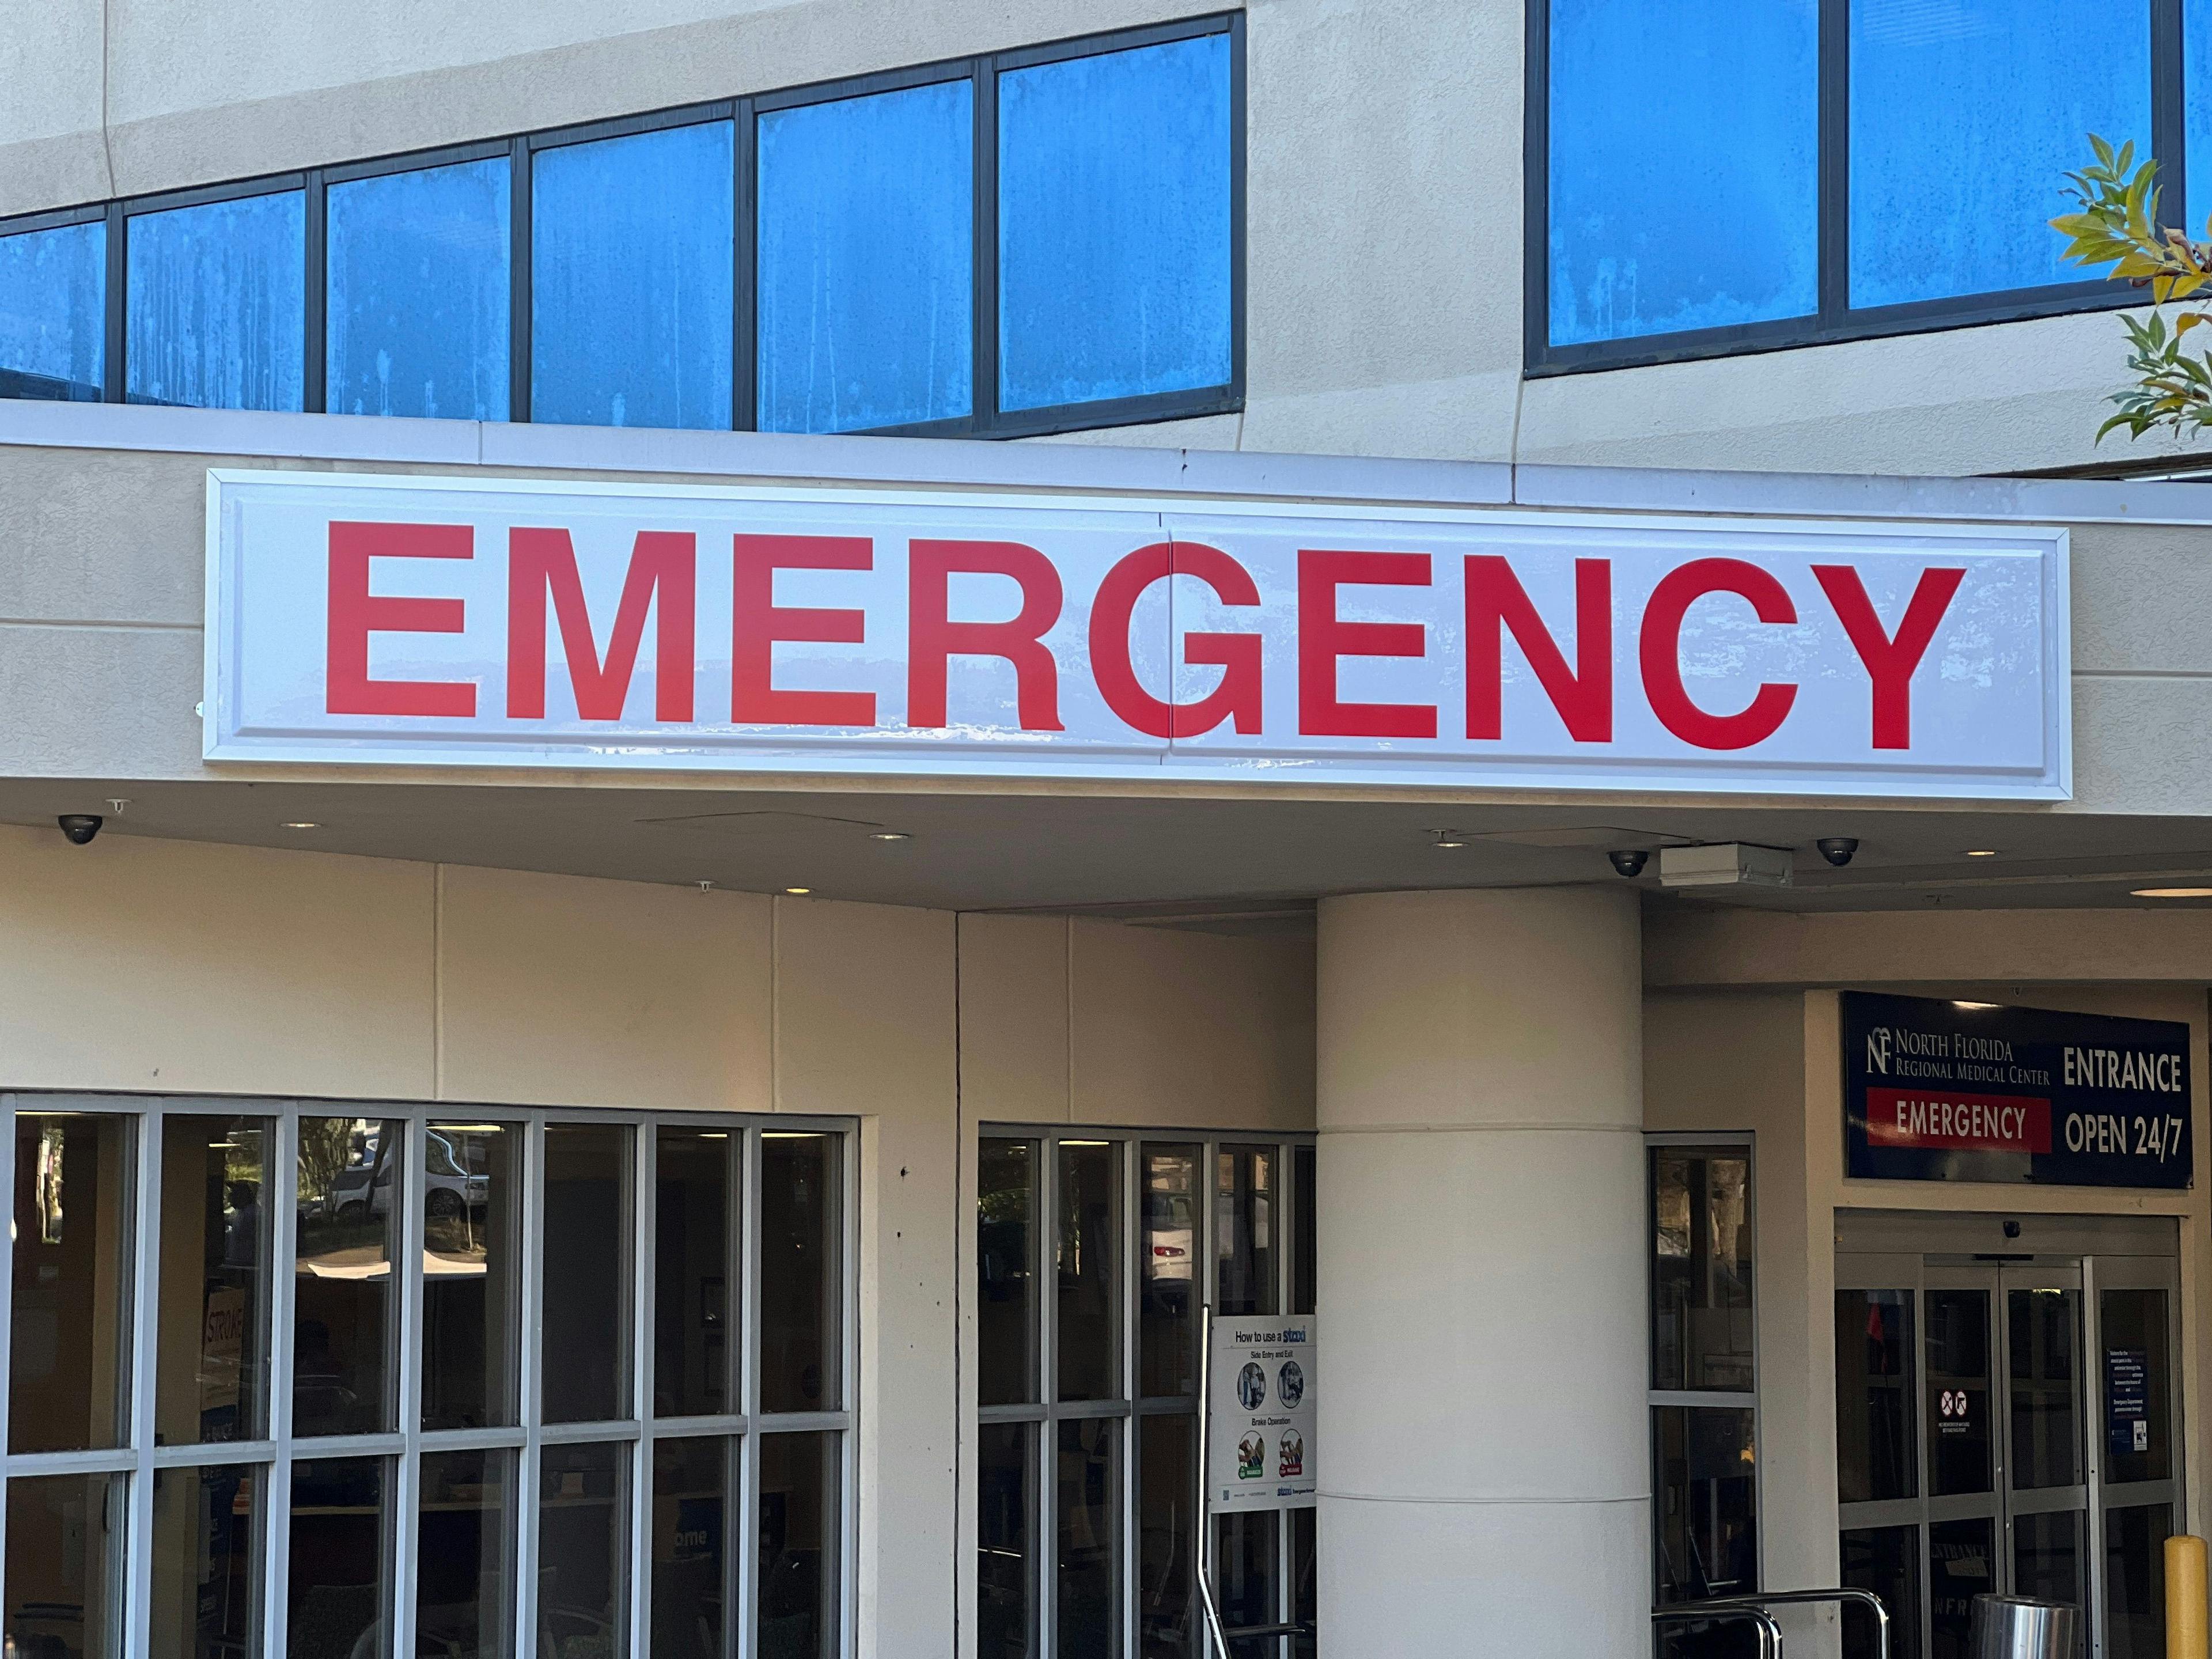 Where hospitals can improve in pediatric emergency care